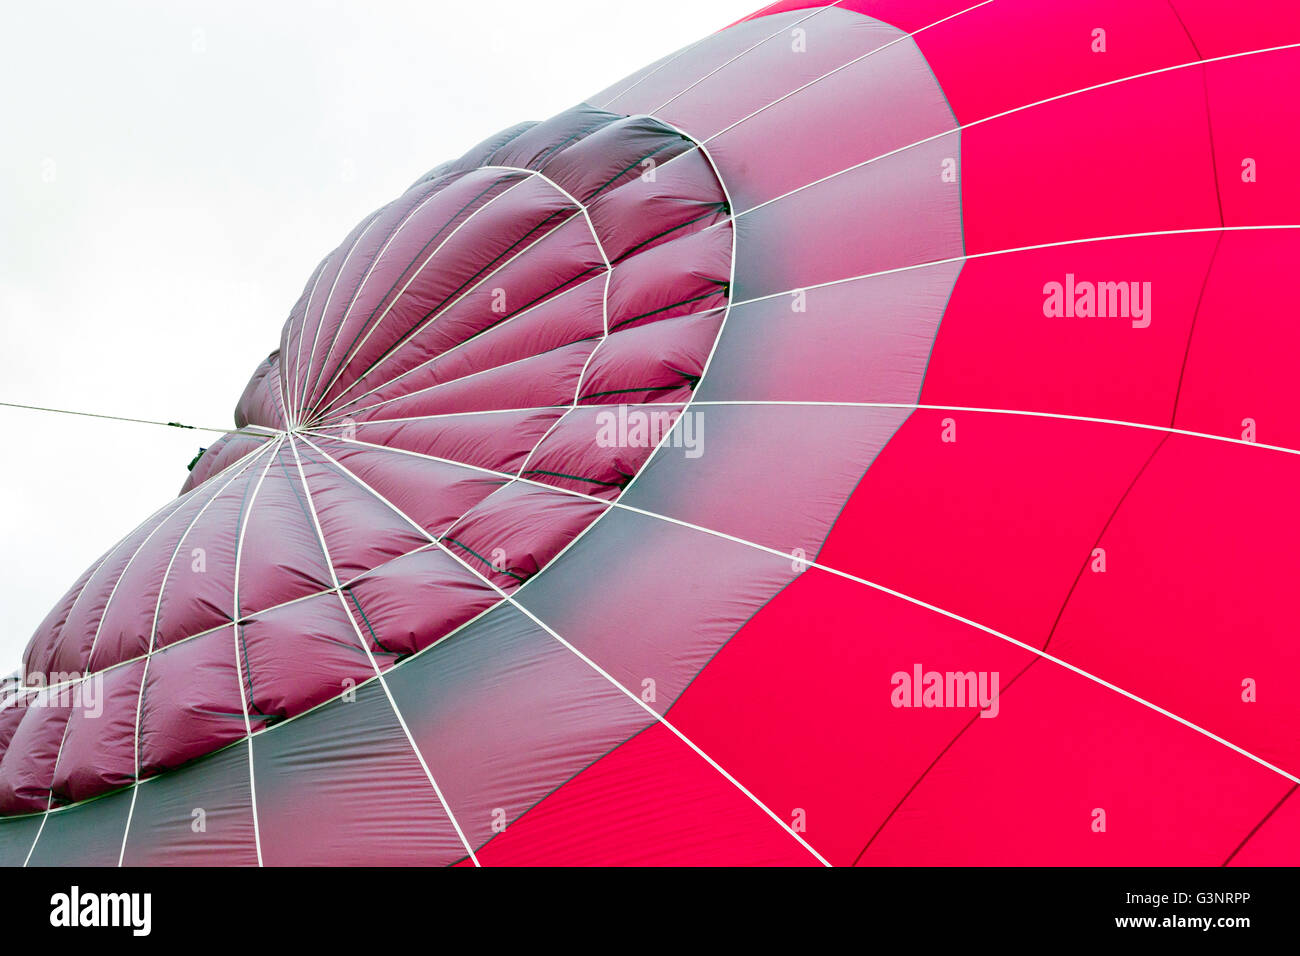 Hot air balloon being inflated at the Bristol Balloon Fiesta, 2013. Stock Photo